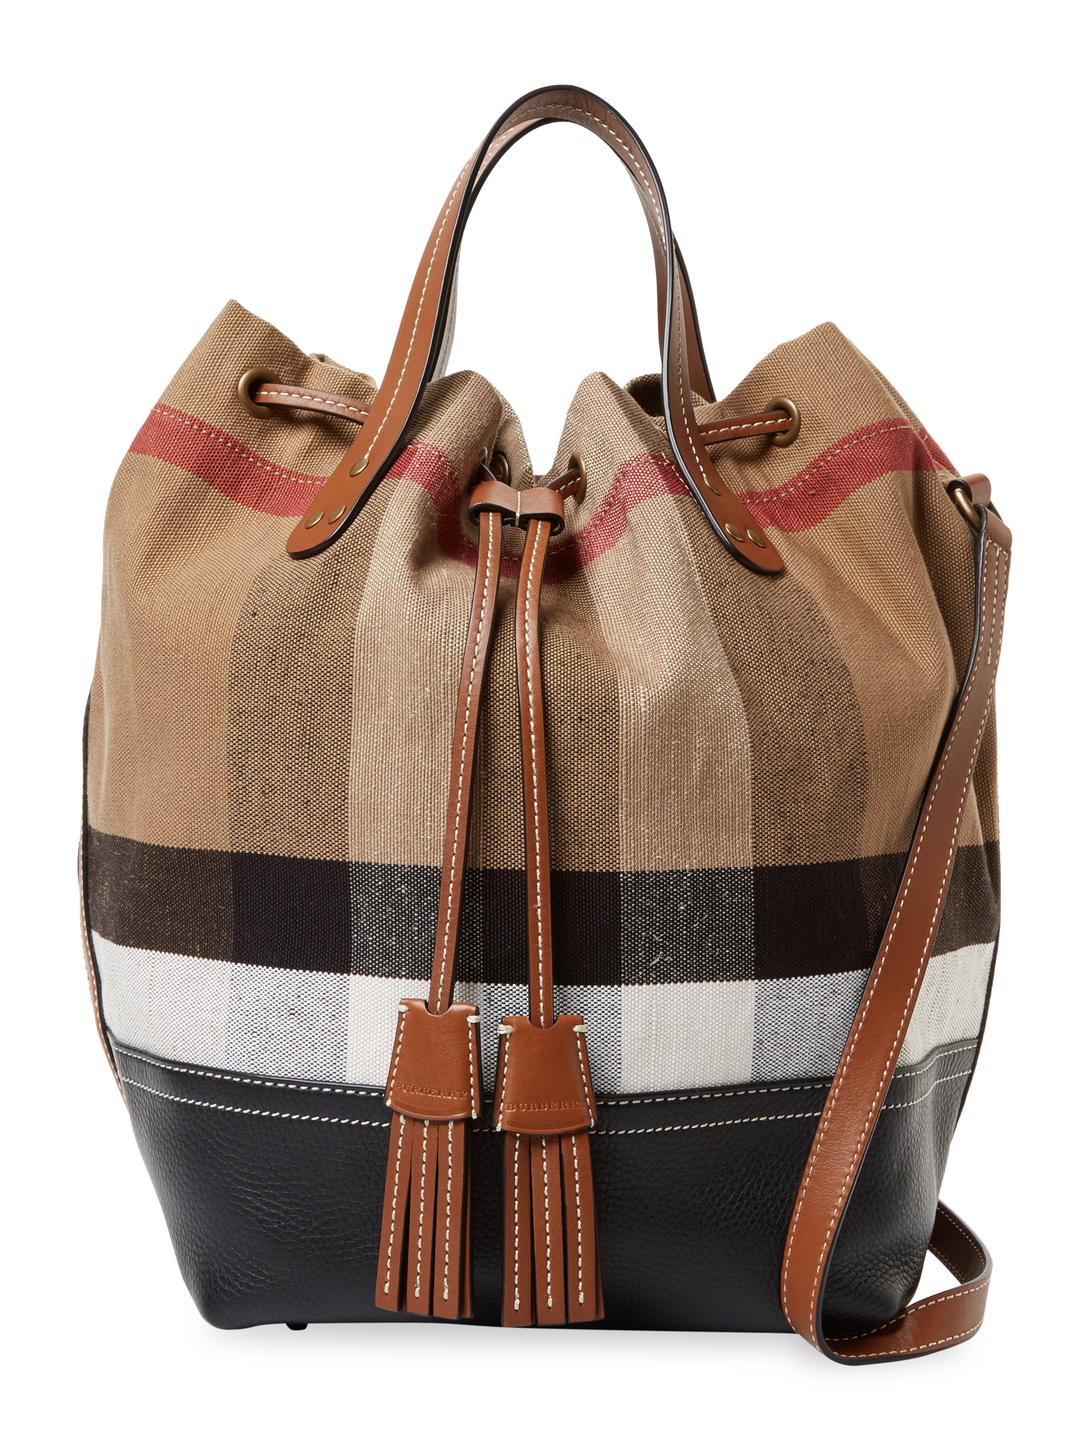 Share more than 75 burberry bucket bags - in.duhocakina